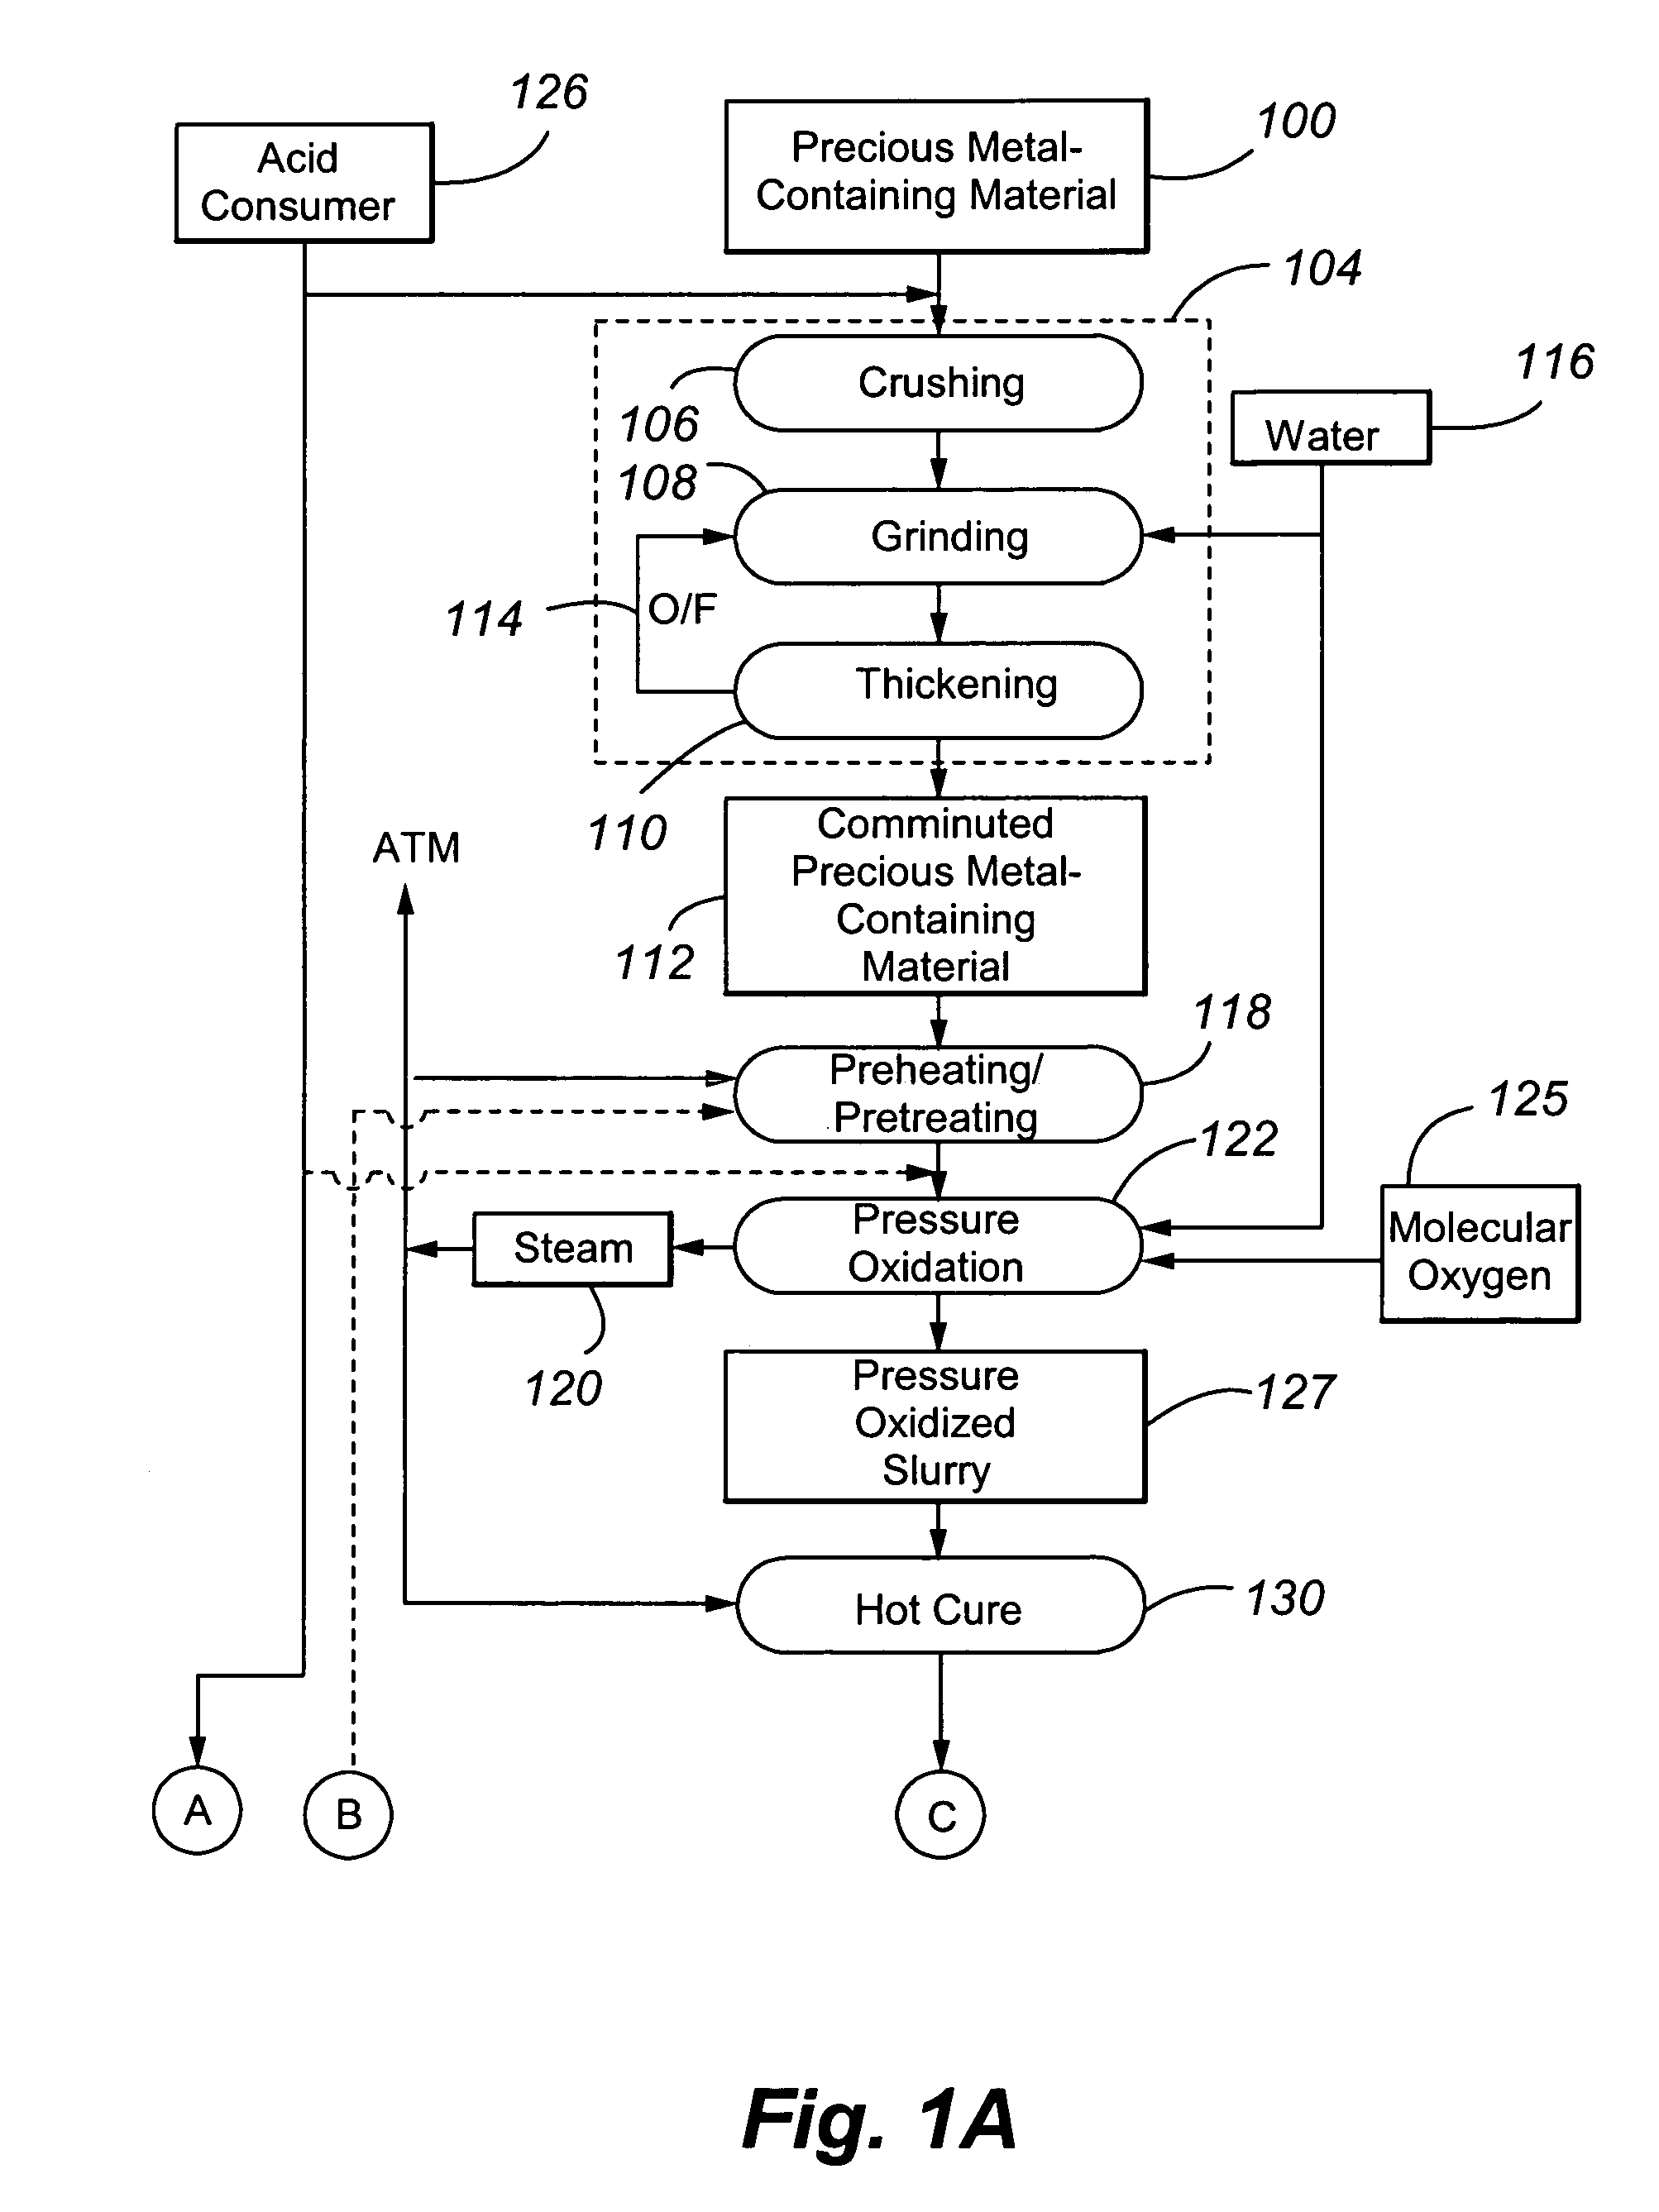 Reduction of lime consumption when treating refractory gold ores or concentrates